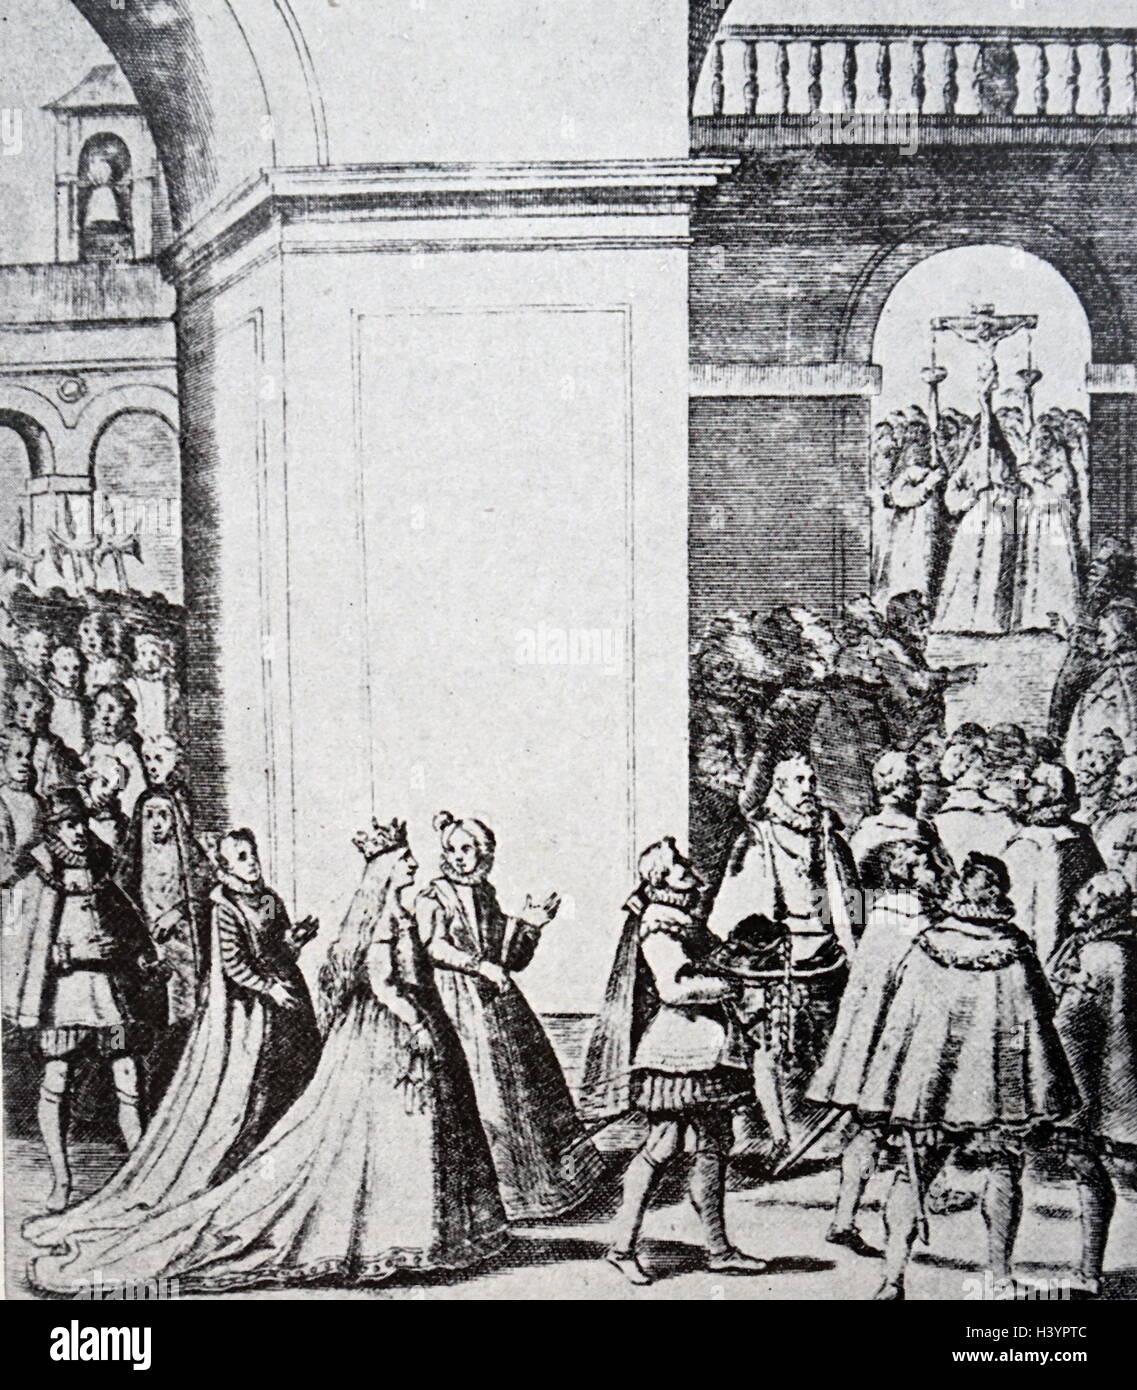 Archduchess Margaret of Austria (Sister Margarita de la Cruz) taking the habit. from the (Descalzas Reales) the 'Royal Barefoot Nuns' 1584. A member of the House of Habsburg, Margaret was born in Vienna on February 16, 1536, the daughter of Ferdinand I, Holy Roman Emperor and his wife Anne of Bohemia and Hungary. She became a nun in Hall in Tirol, where she died on March 12, 1567. Stock Photo